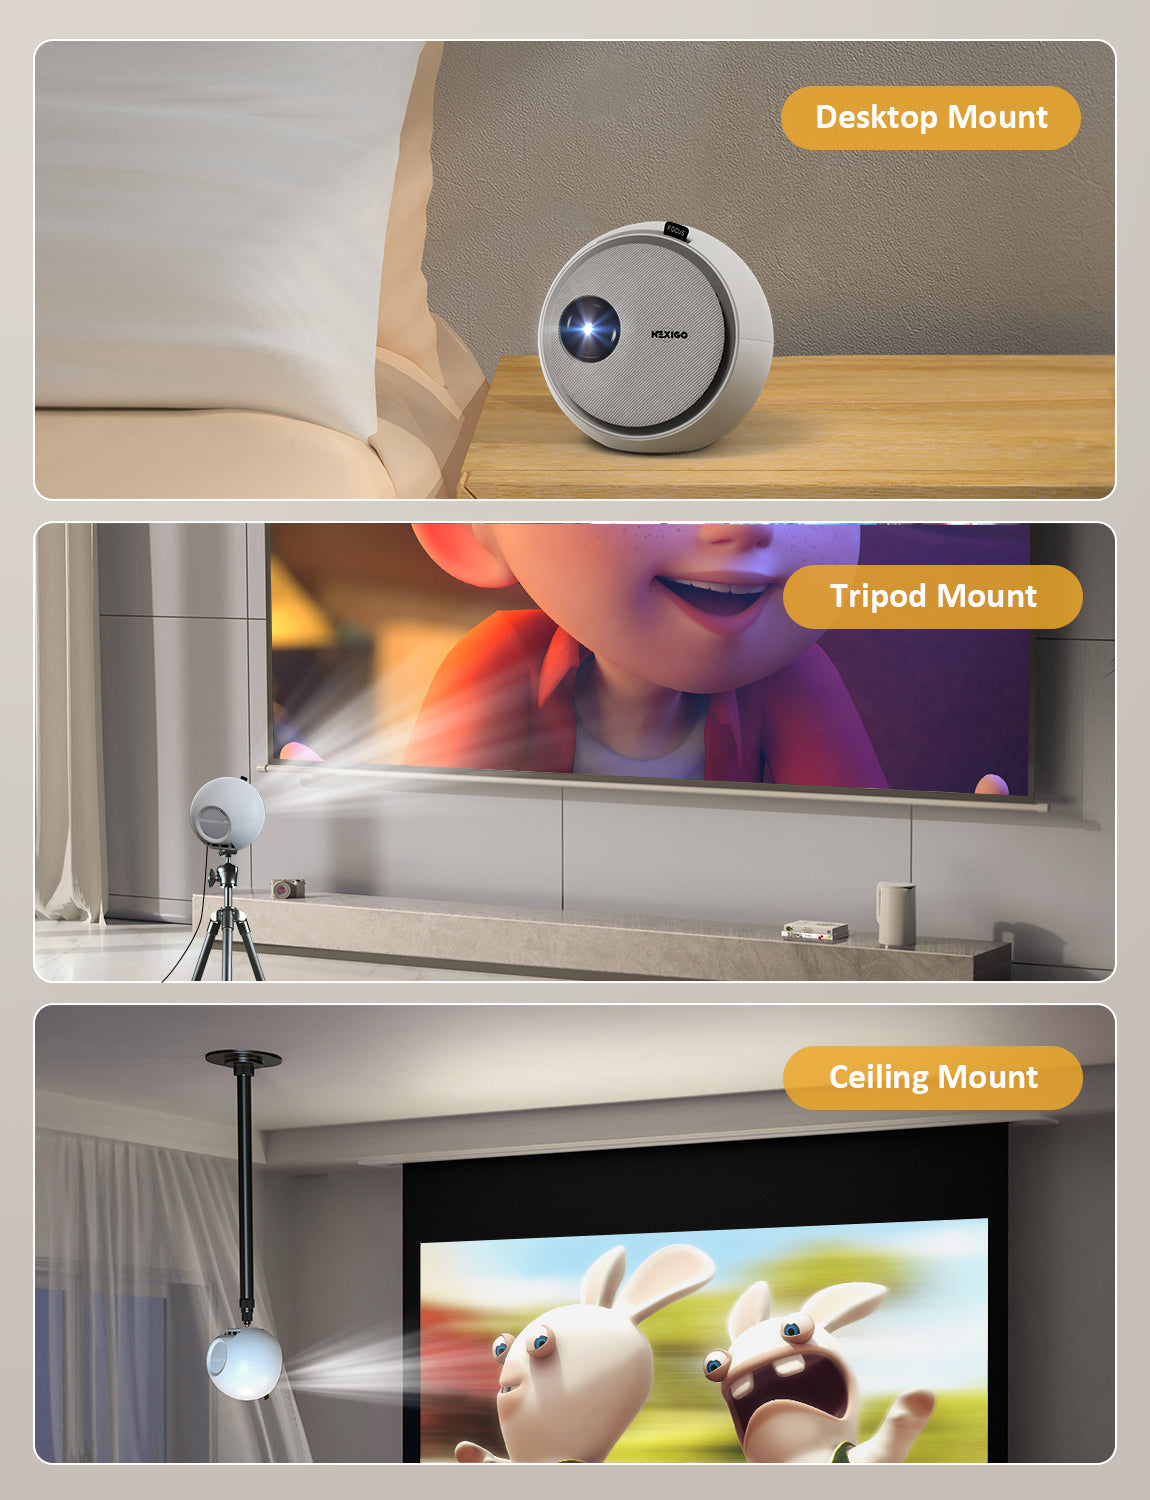 The projector can be installed on the ceiling, on a tripod stand, or on a tabletop.